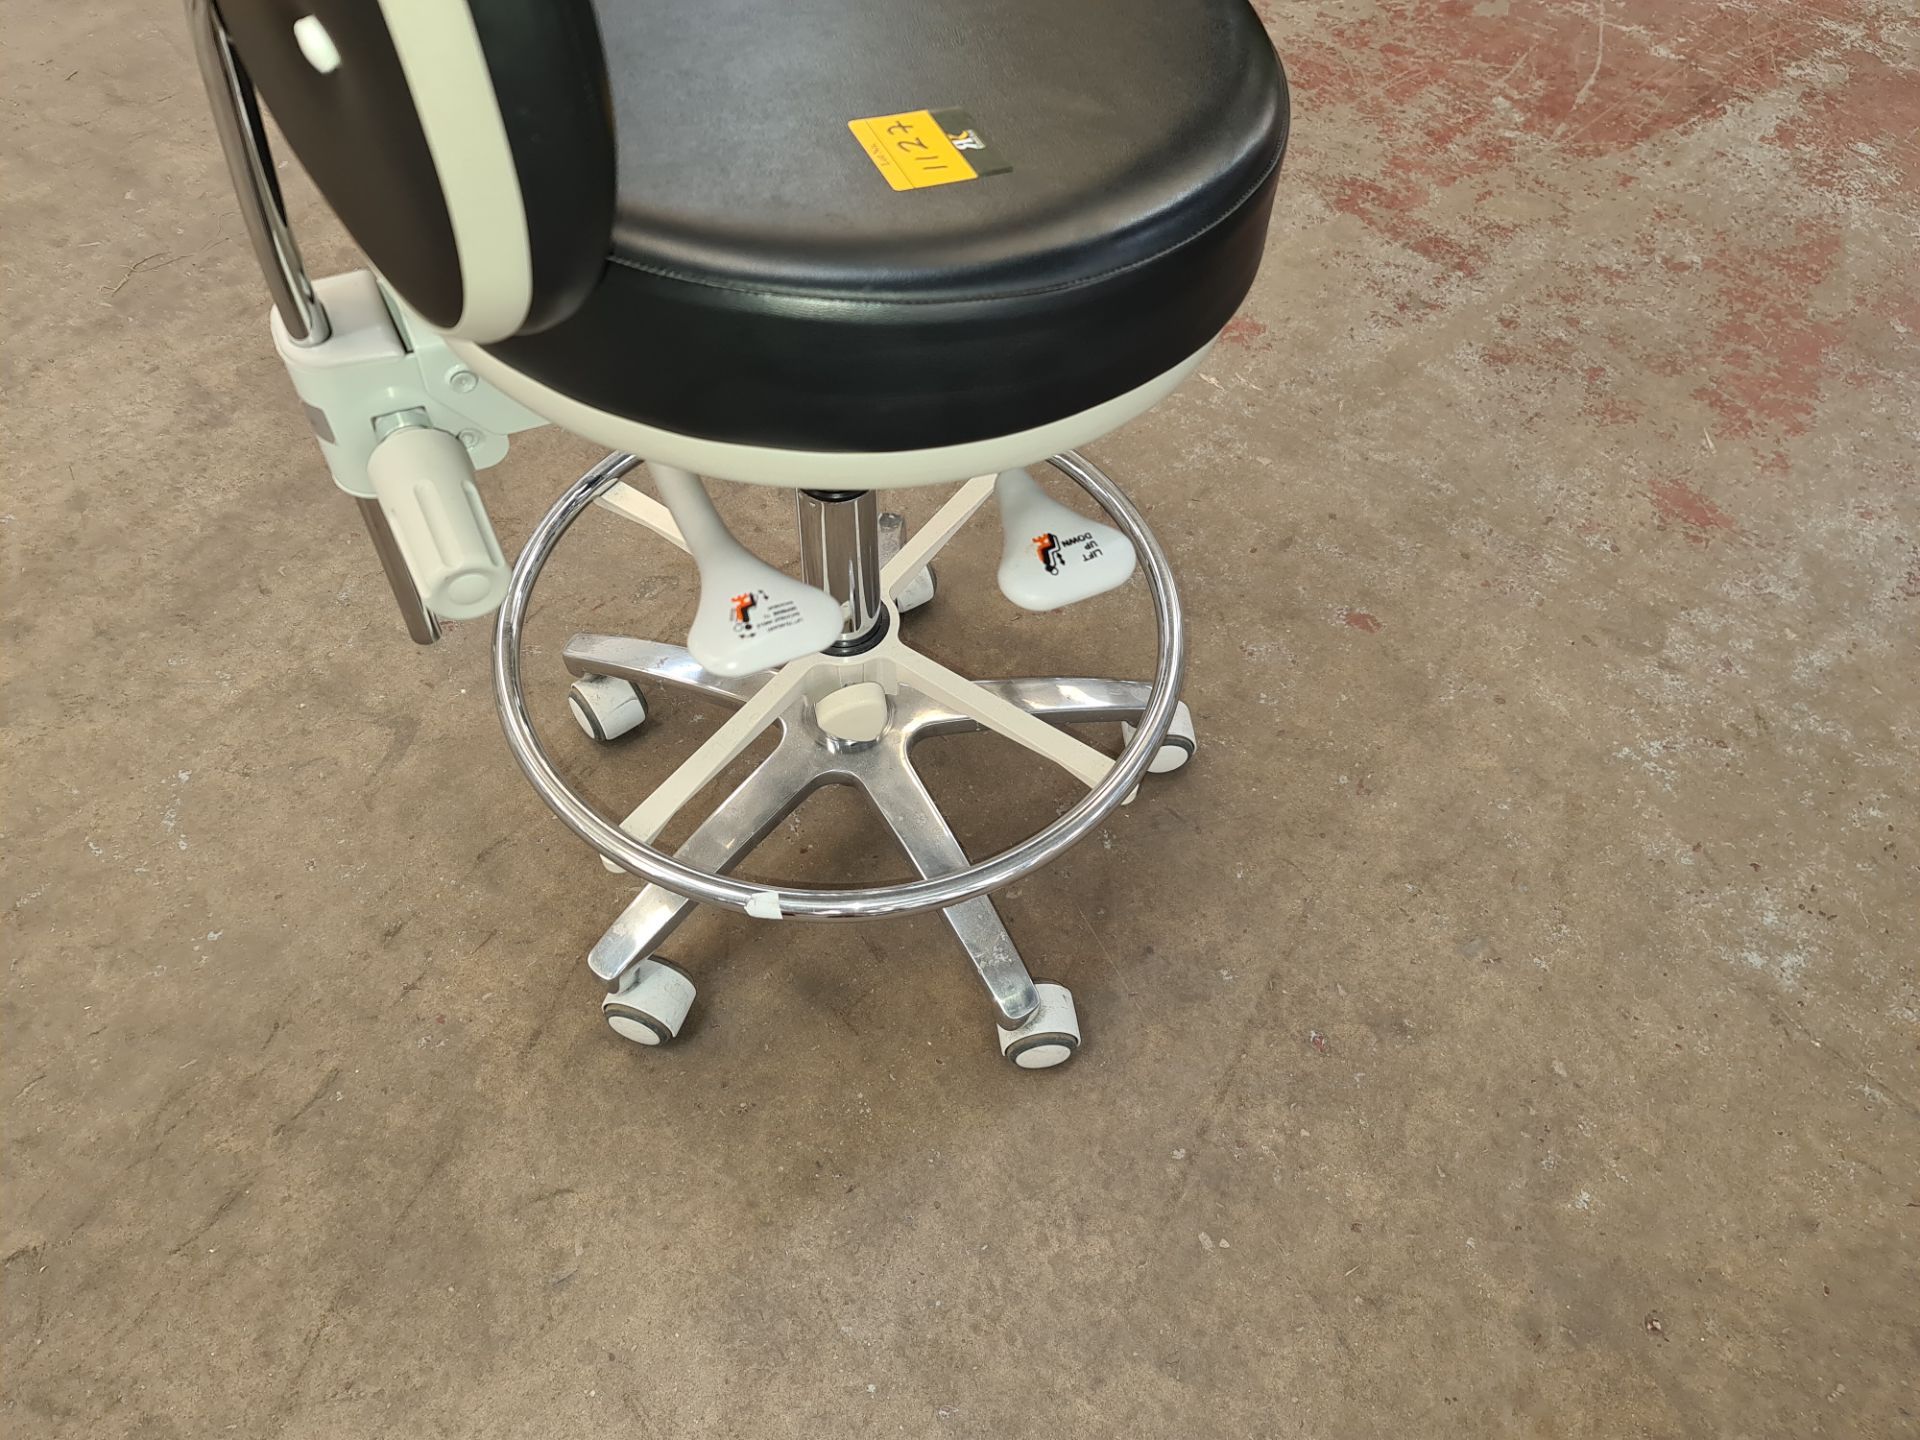 Murray multi-adjustable dental stool with circular footrest - Image 4 of 5